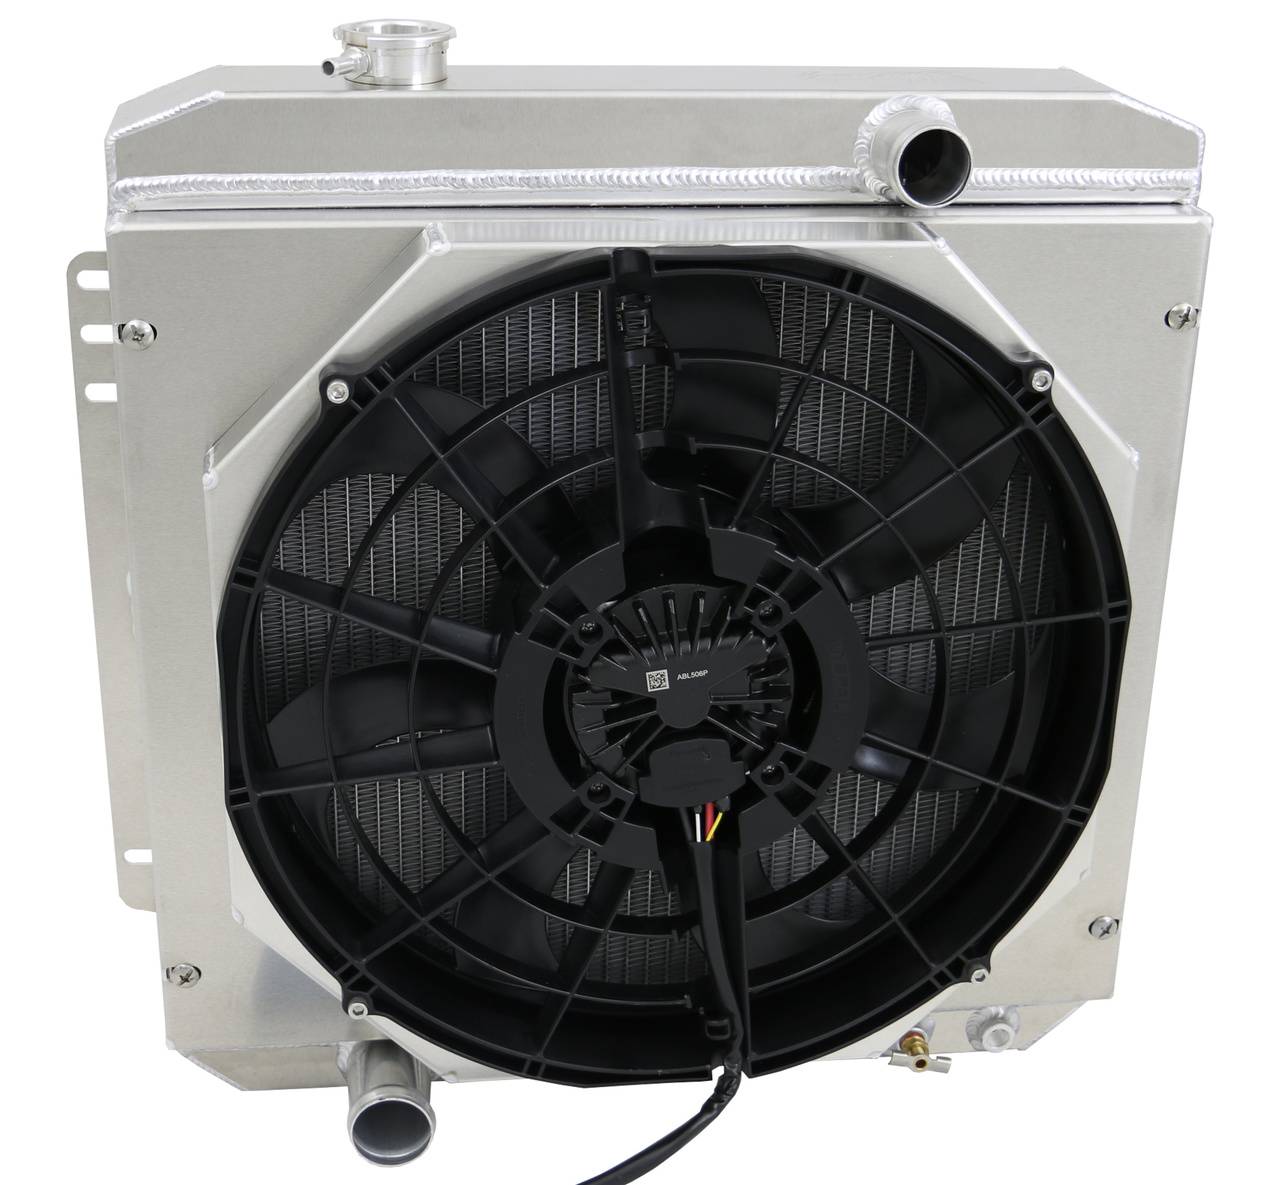 Wizard Cooling Inc - Wizard Cooling - 1962-1968 Ford Fairlane & 1966-70 Falcon Aluminum Radiator W/ Brushless Fan Shroud - 260-208BL